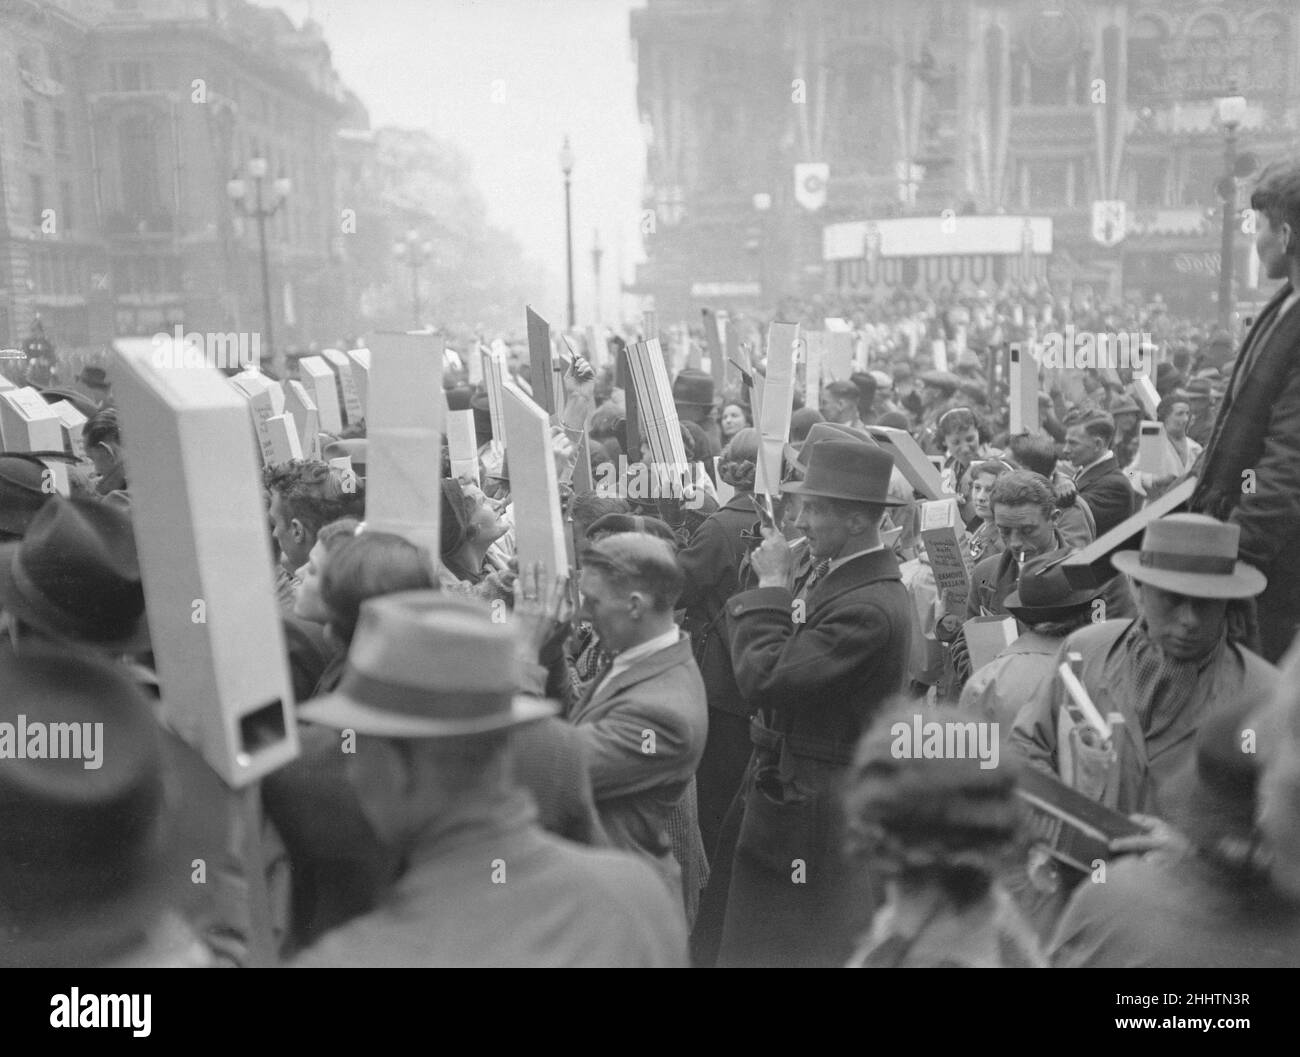 Coronation of King George VI.Huge crowds of people with their periscopes to get a better view of the event as they await the arrival of the procession. 12th May 1937. Stock Photo